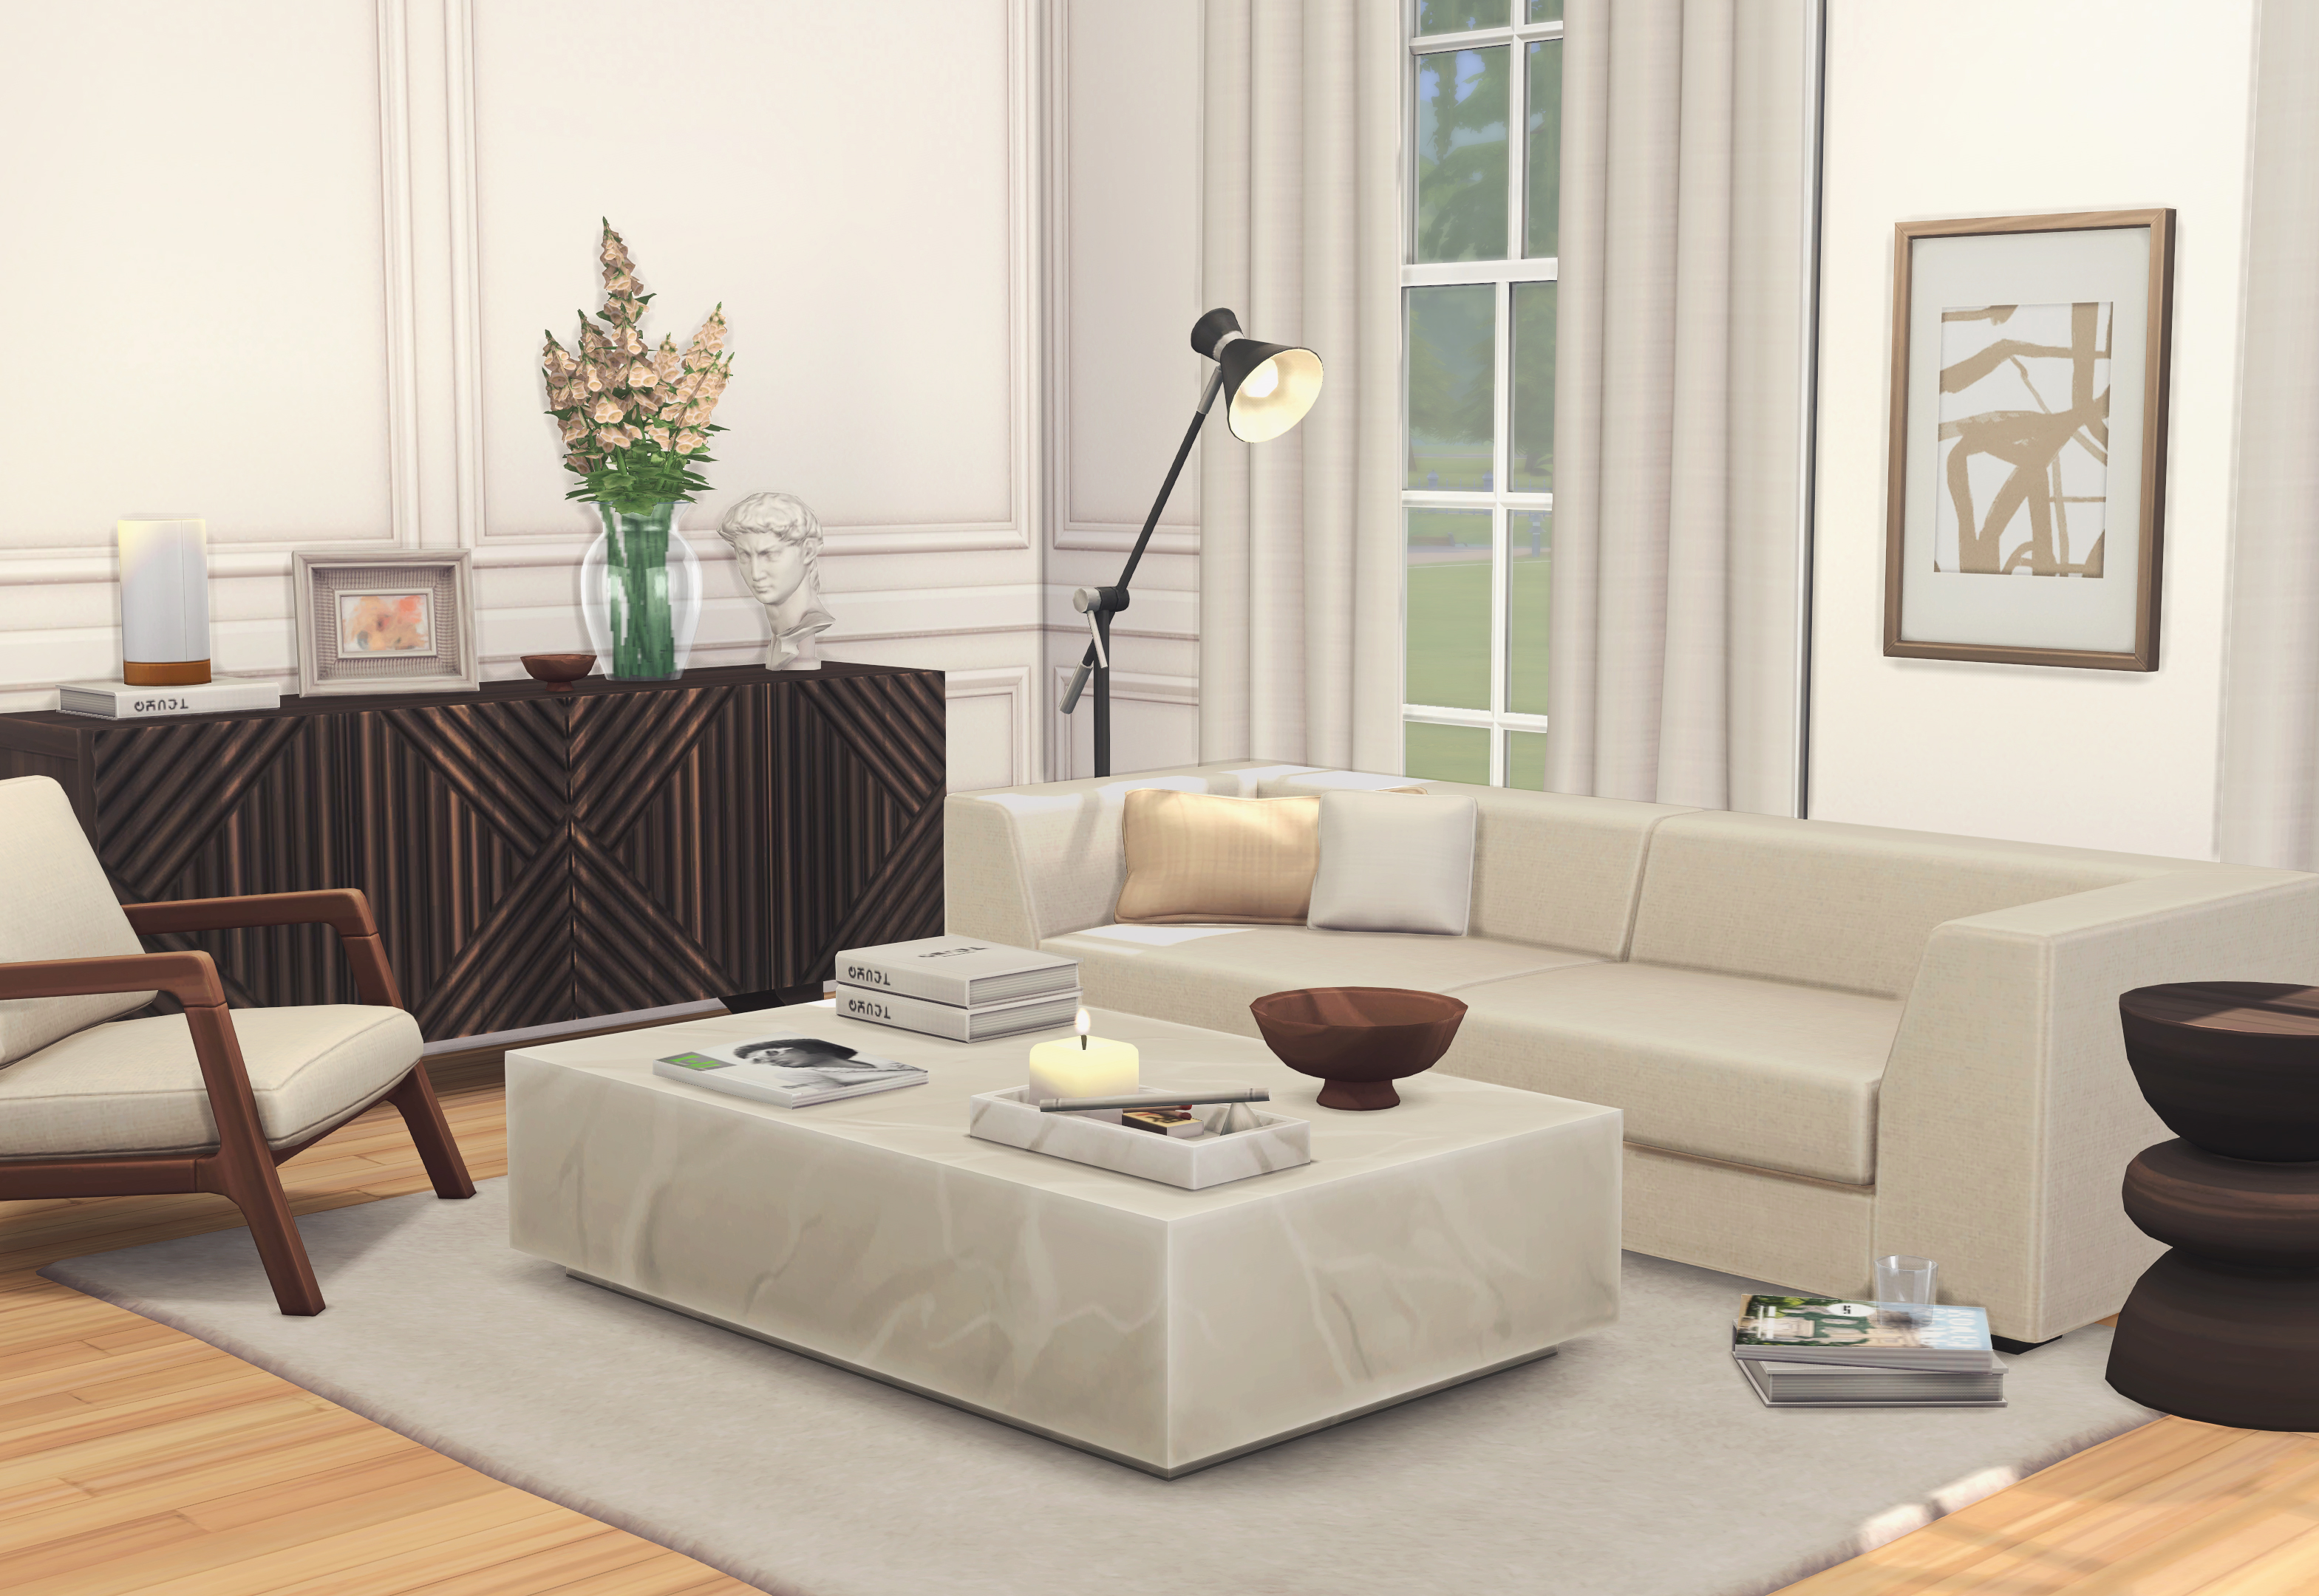 The Furniture Showroom - The Sims 4 Build / Buy - CurseForge